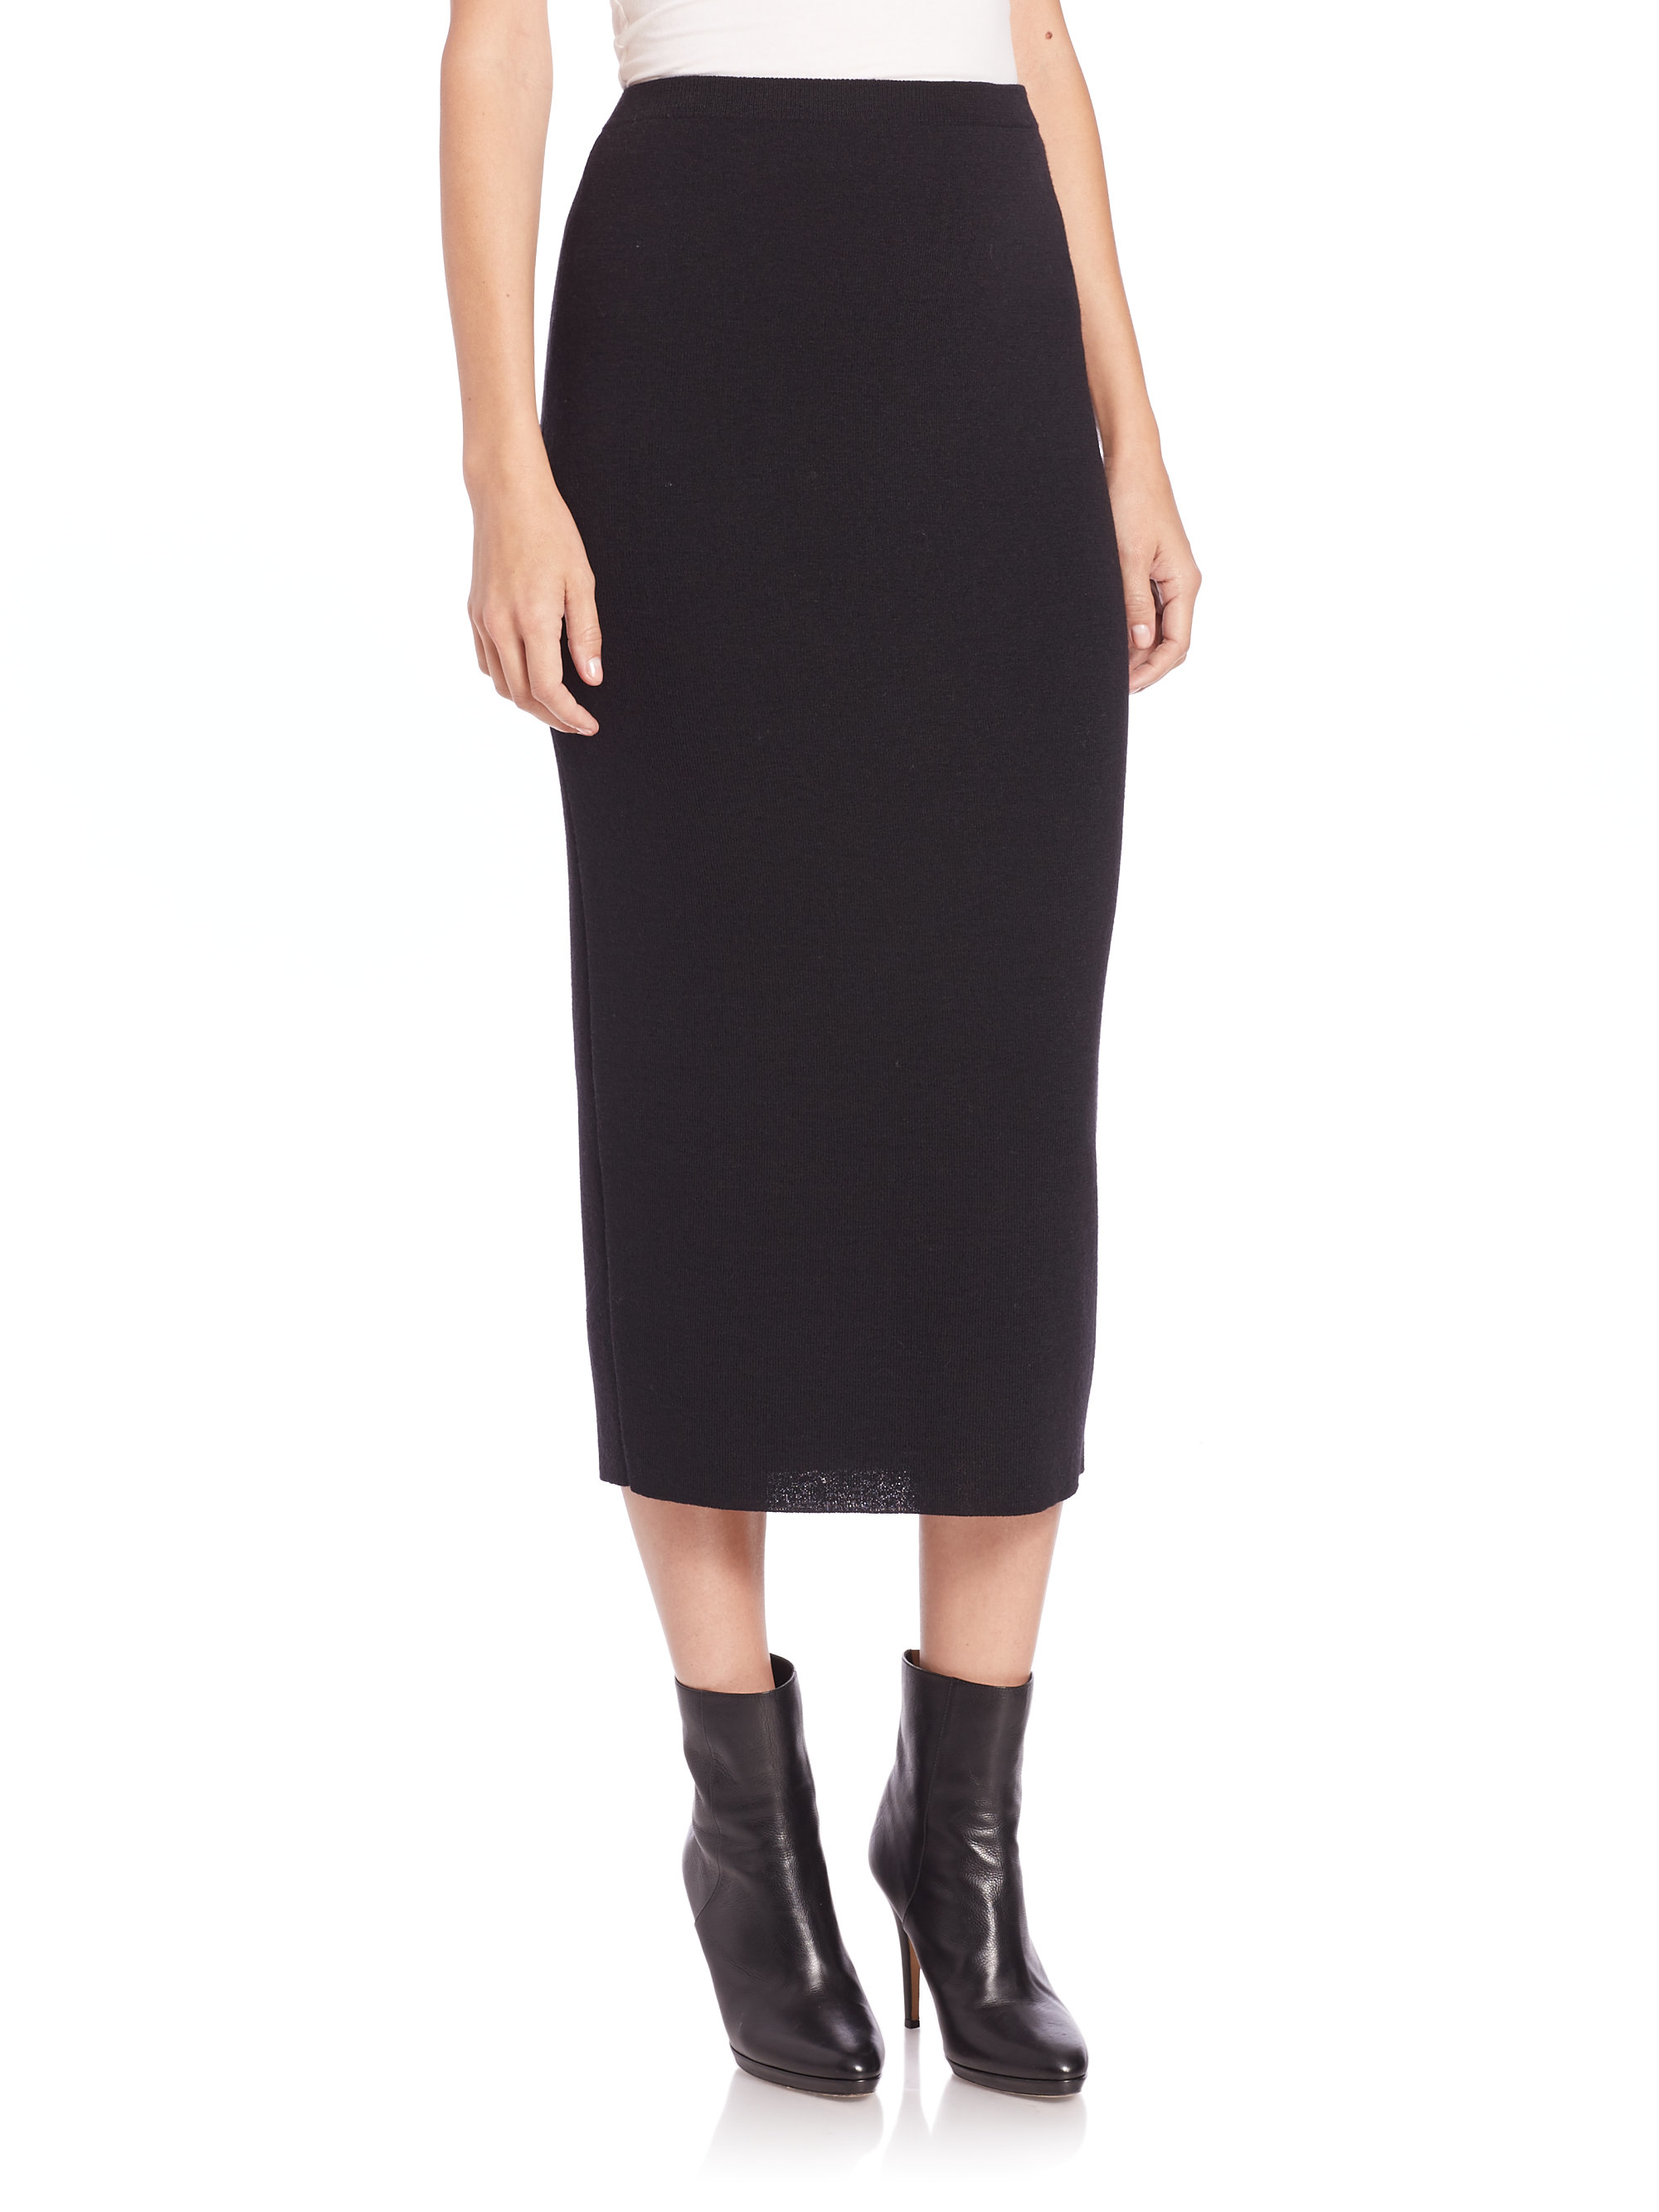 Lyst - Eileen Fisher Icon Wool Pencil Skirt in Black